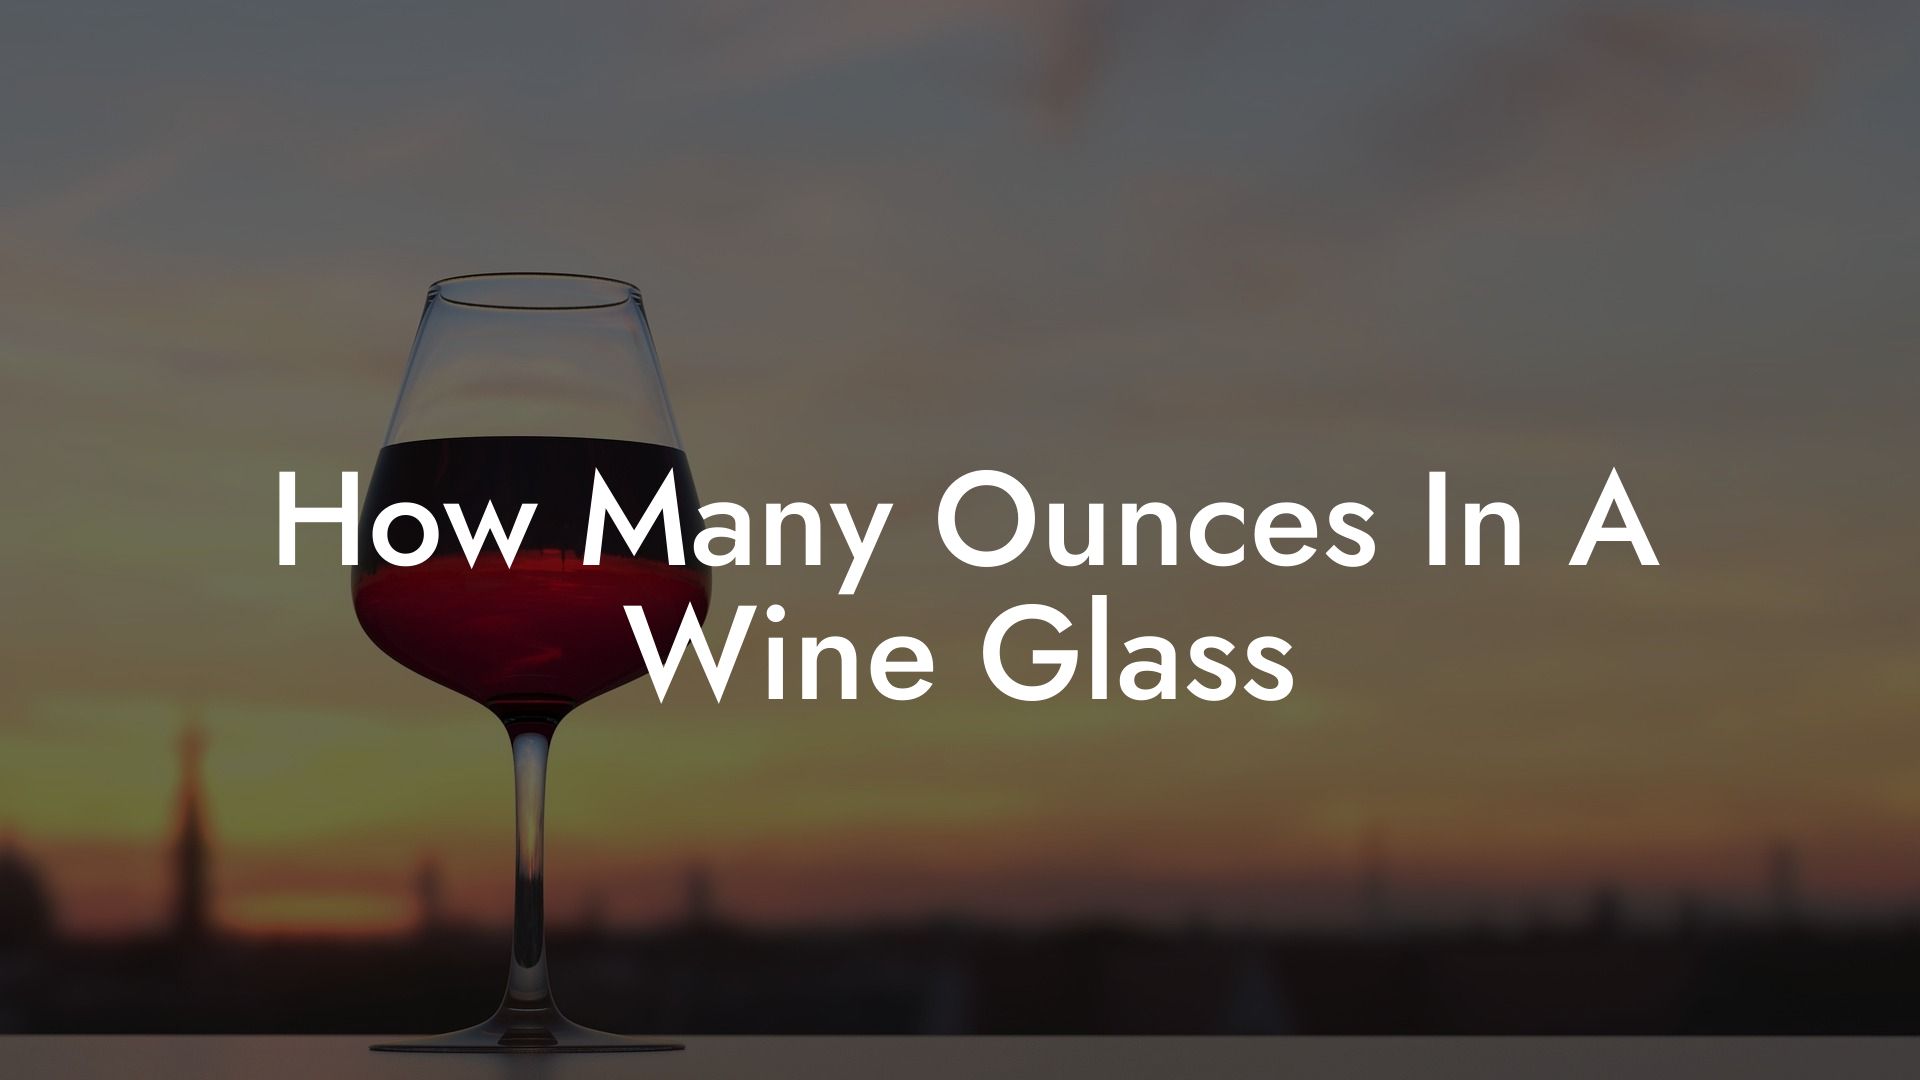 How Many Ounces In A Wine Glass